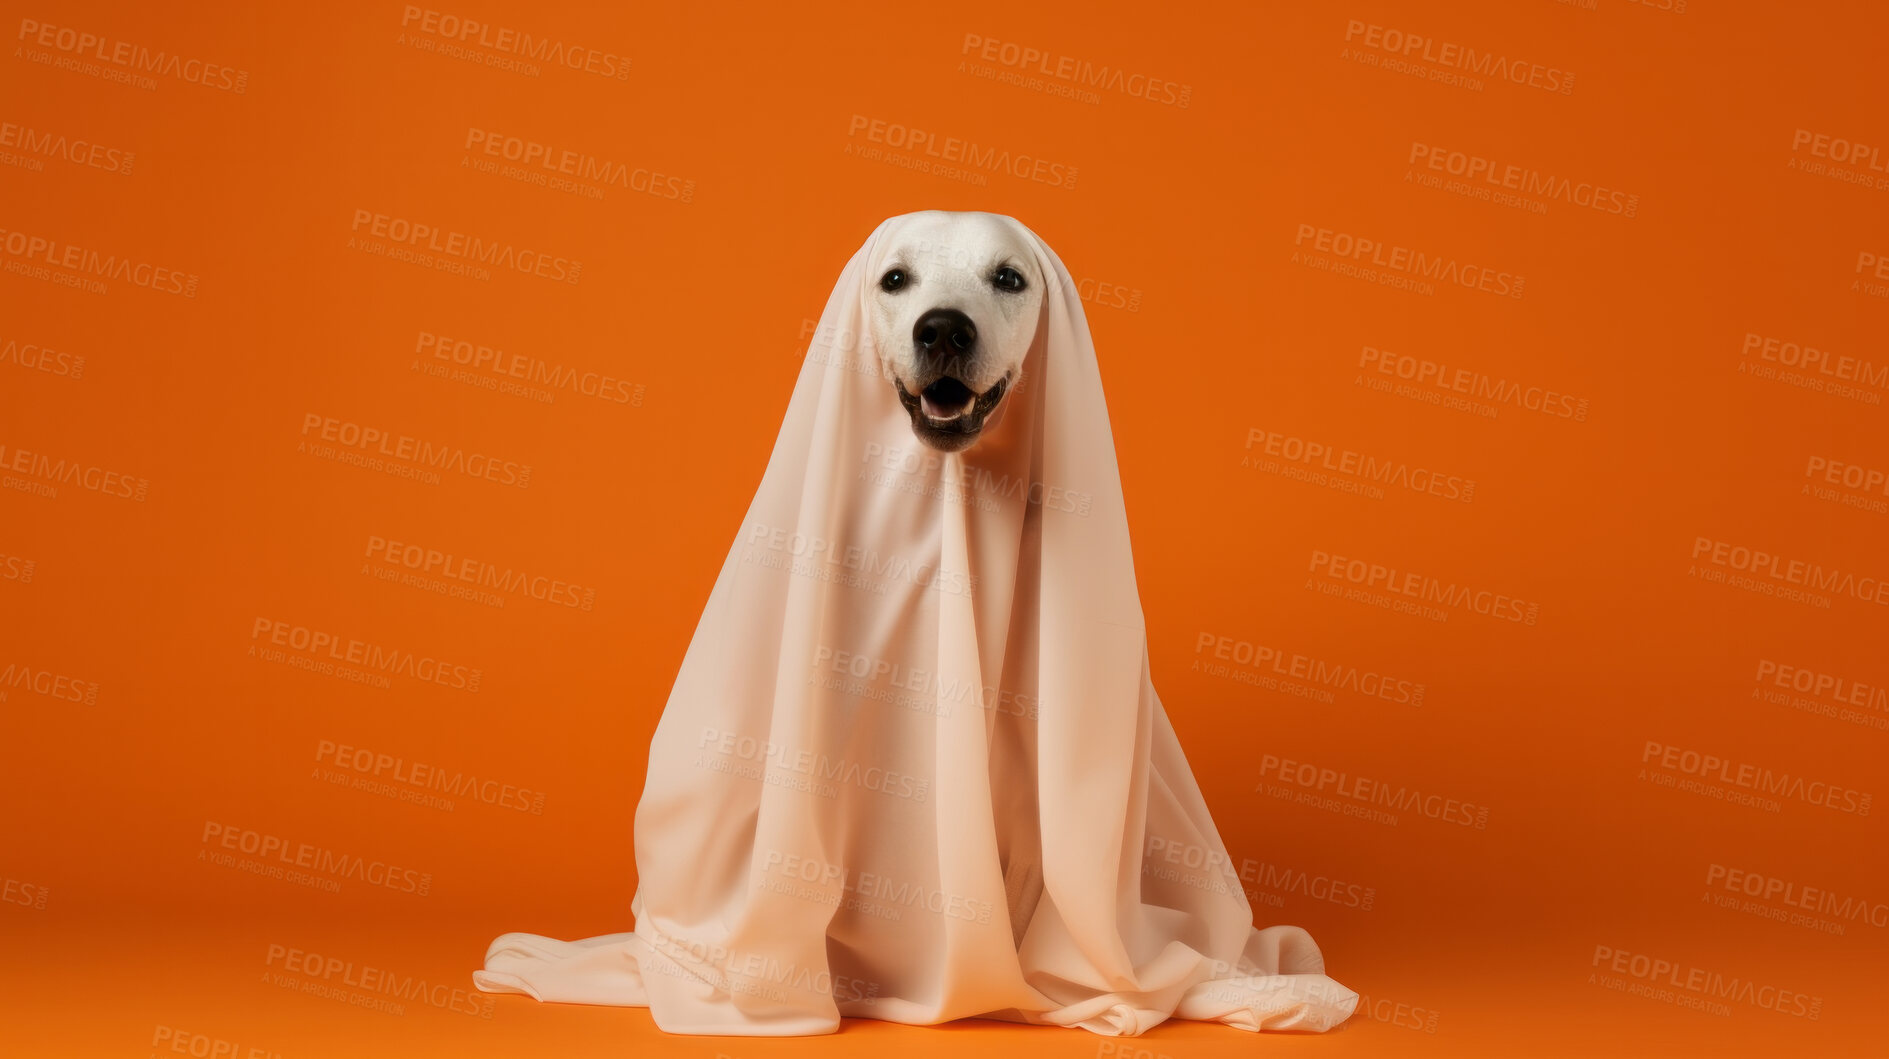 Buy stock photo Dog wearing a ghost costume, carved pumpkins for halloween celebration against orange wall